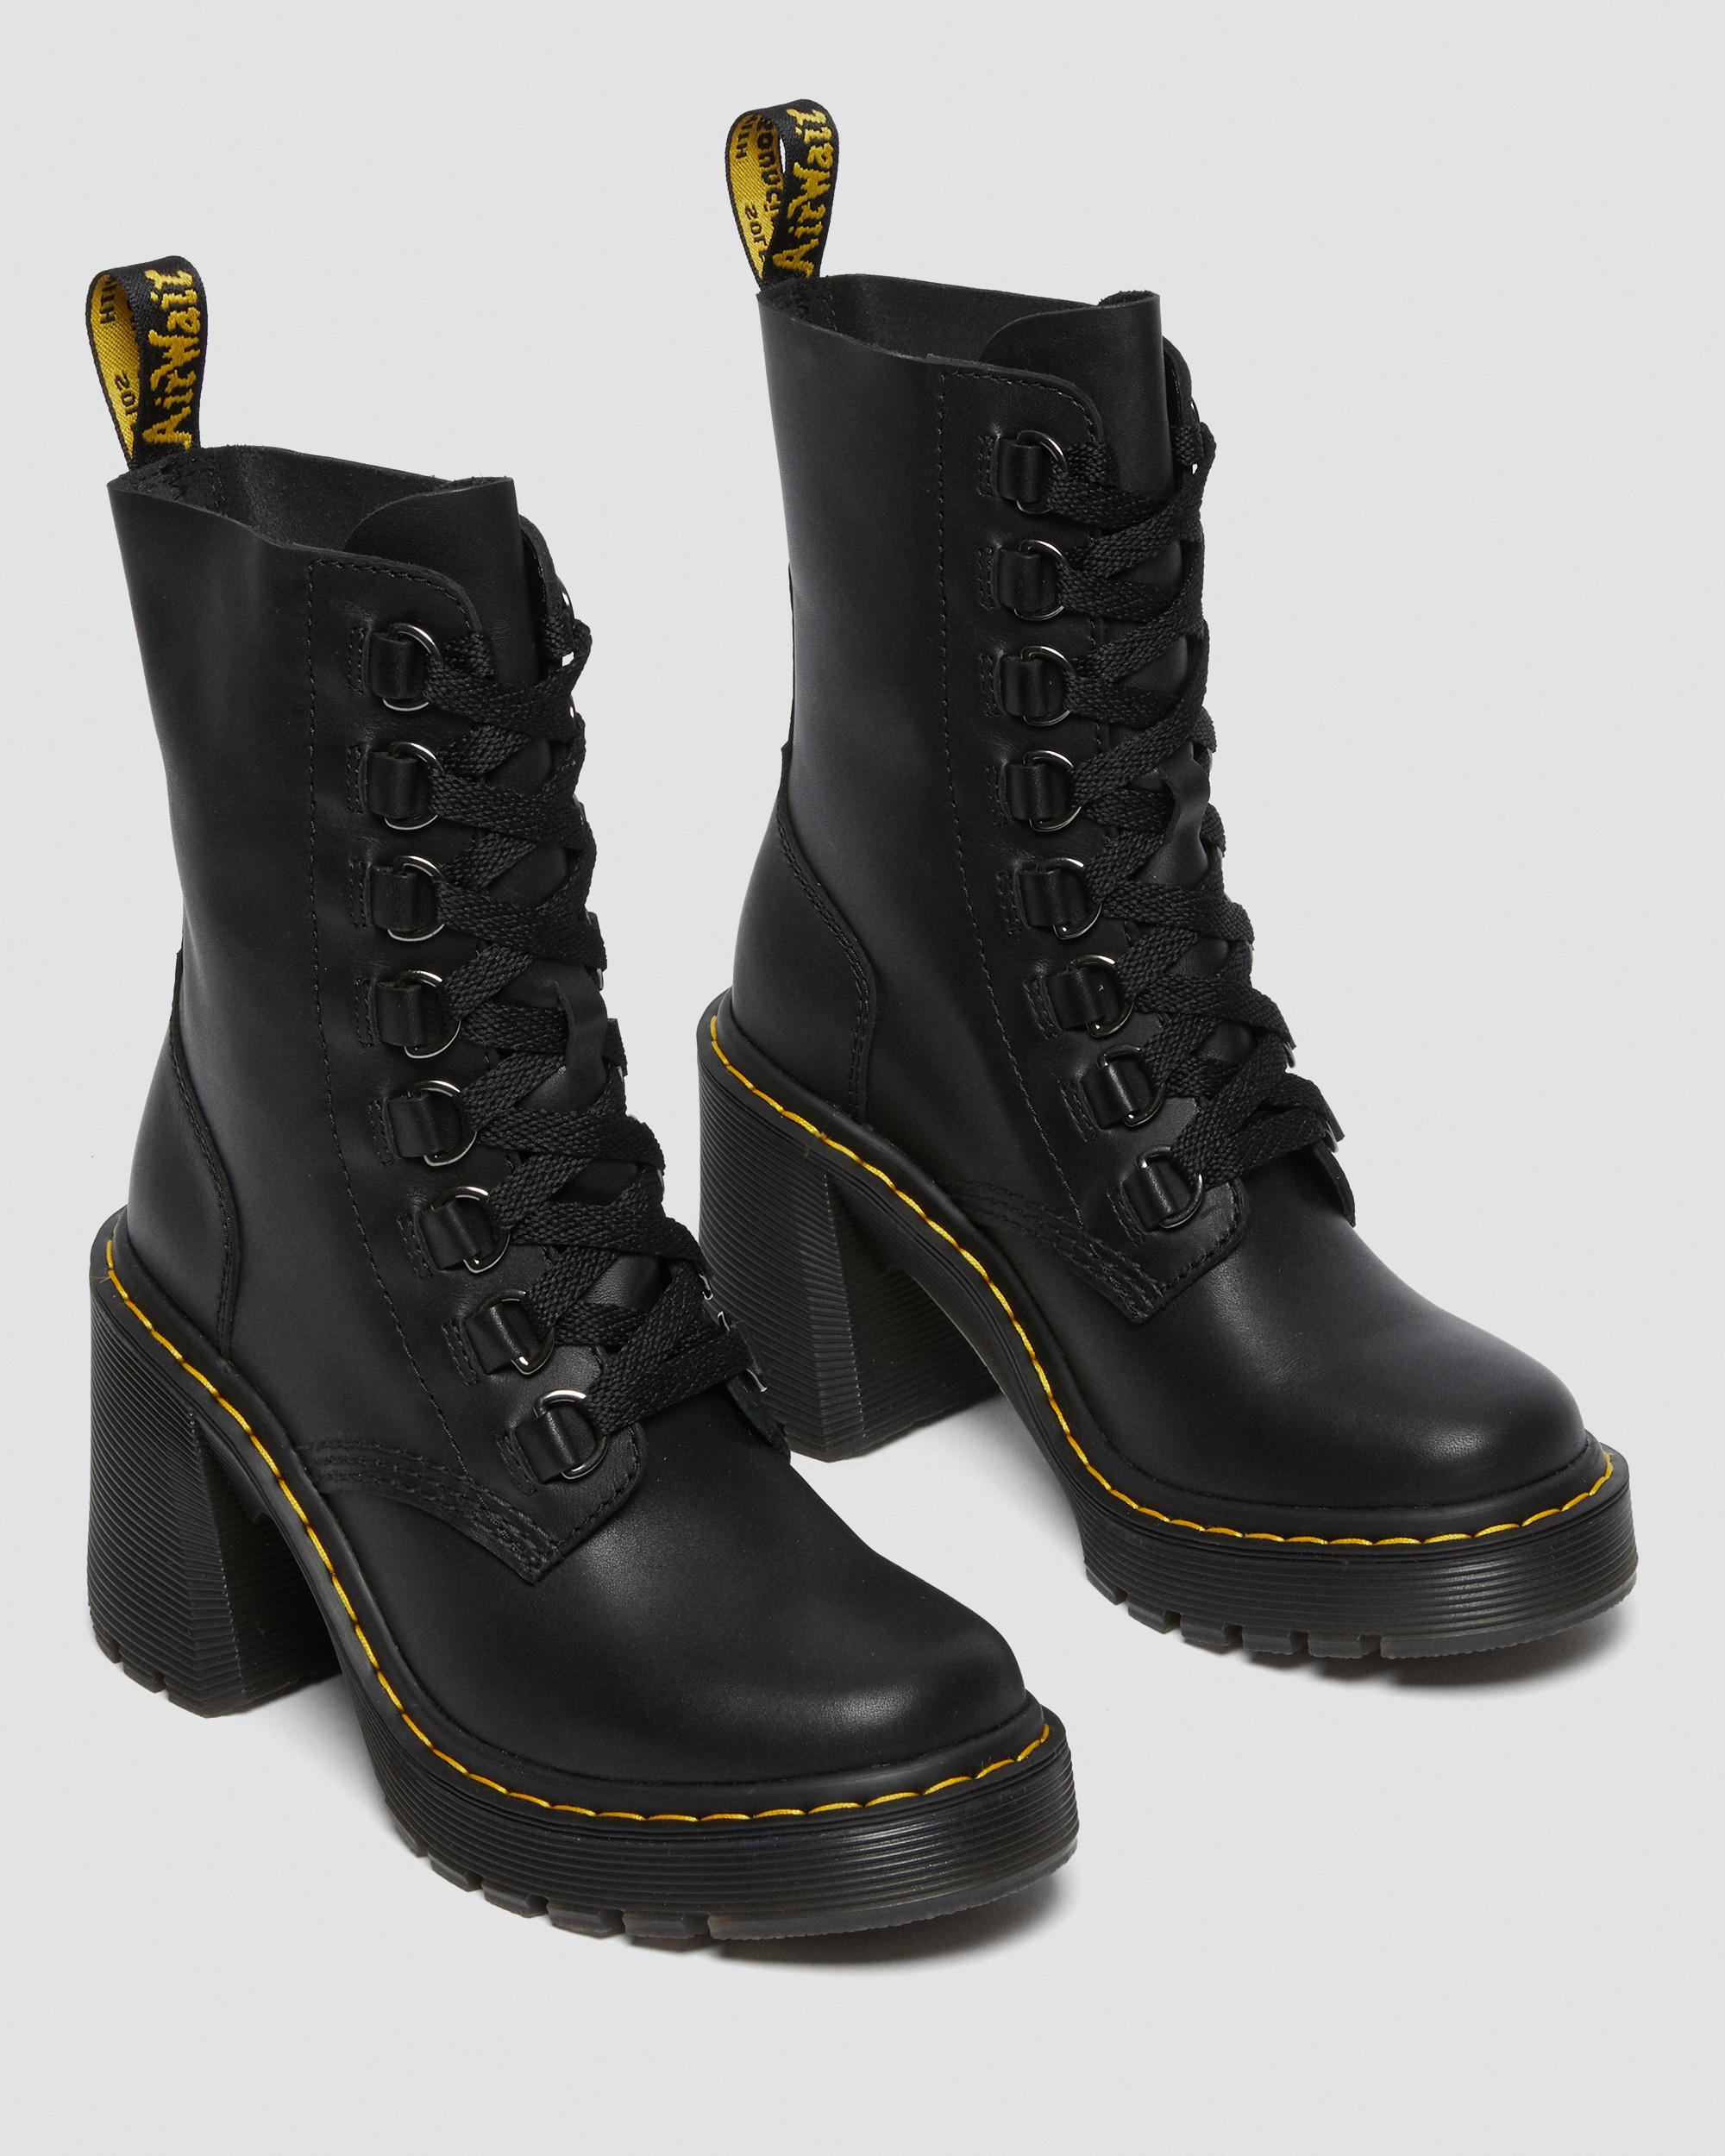 Chesney Leather Fla Heel Lace Up BootsChesney Leather Flared Heel Lace Up Boots Dr. Martens